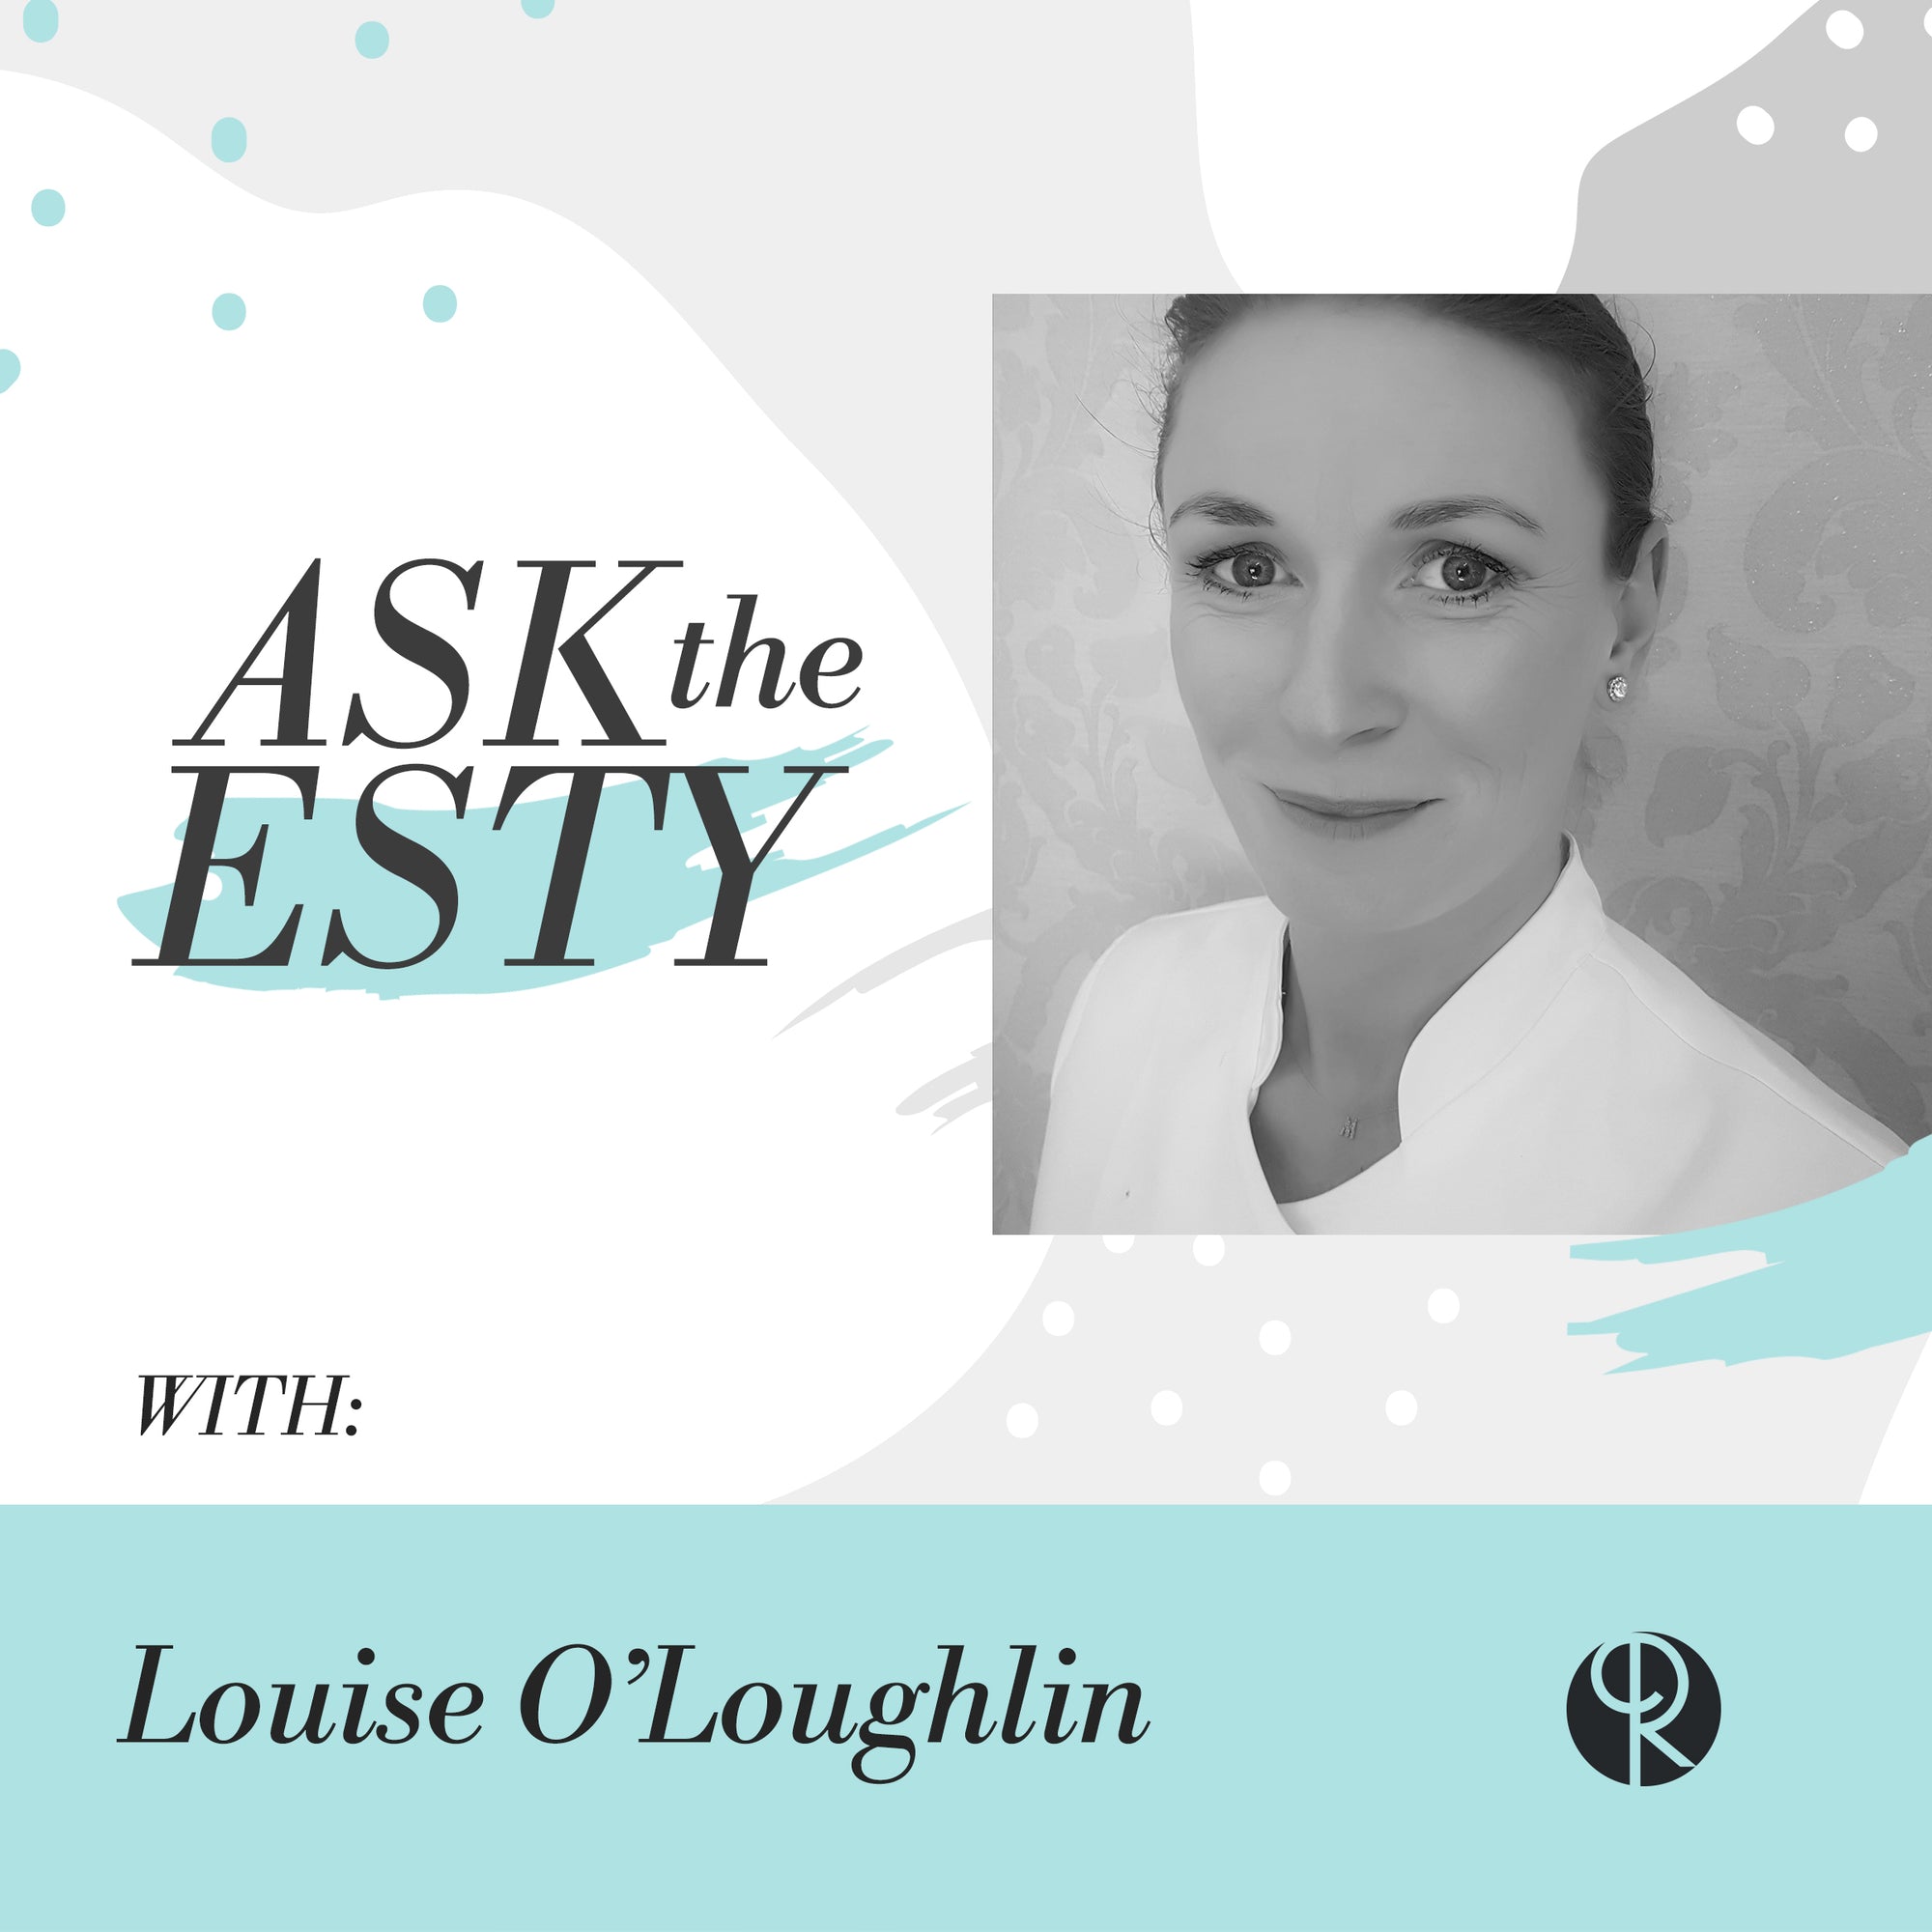 Ask the Esty: 3 Tips to Take Care of Your Skin Right Now